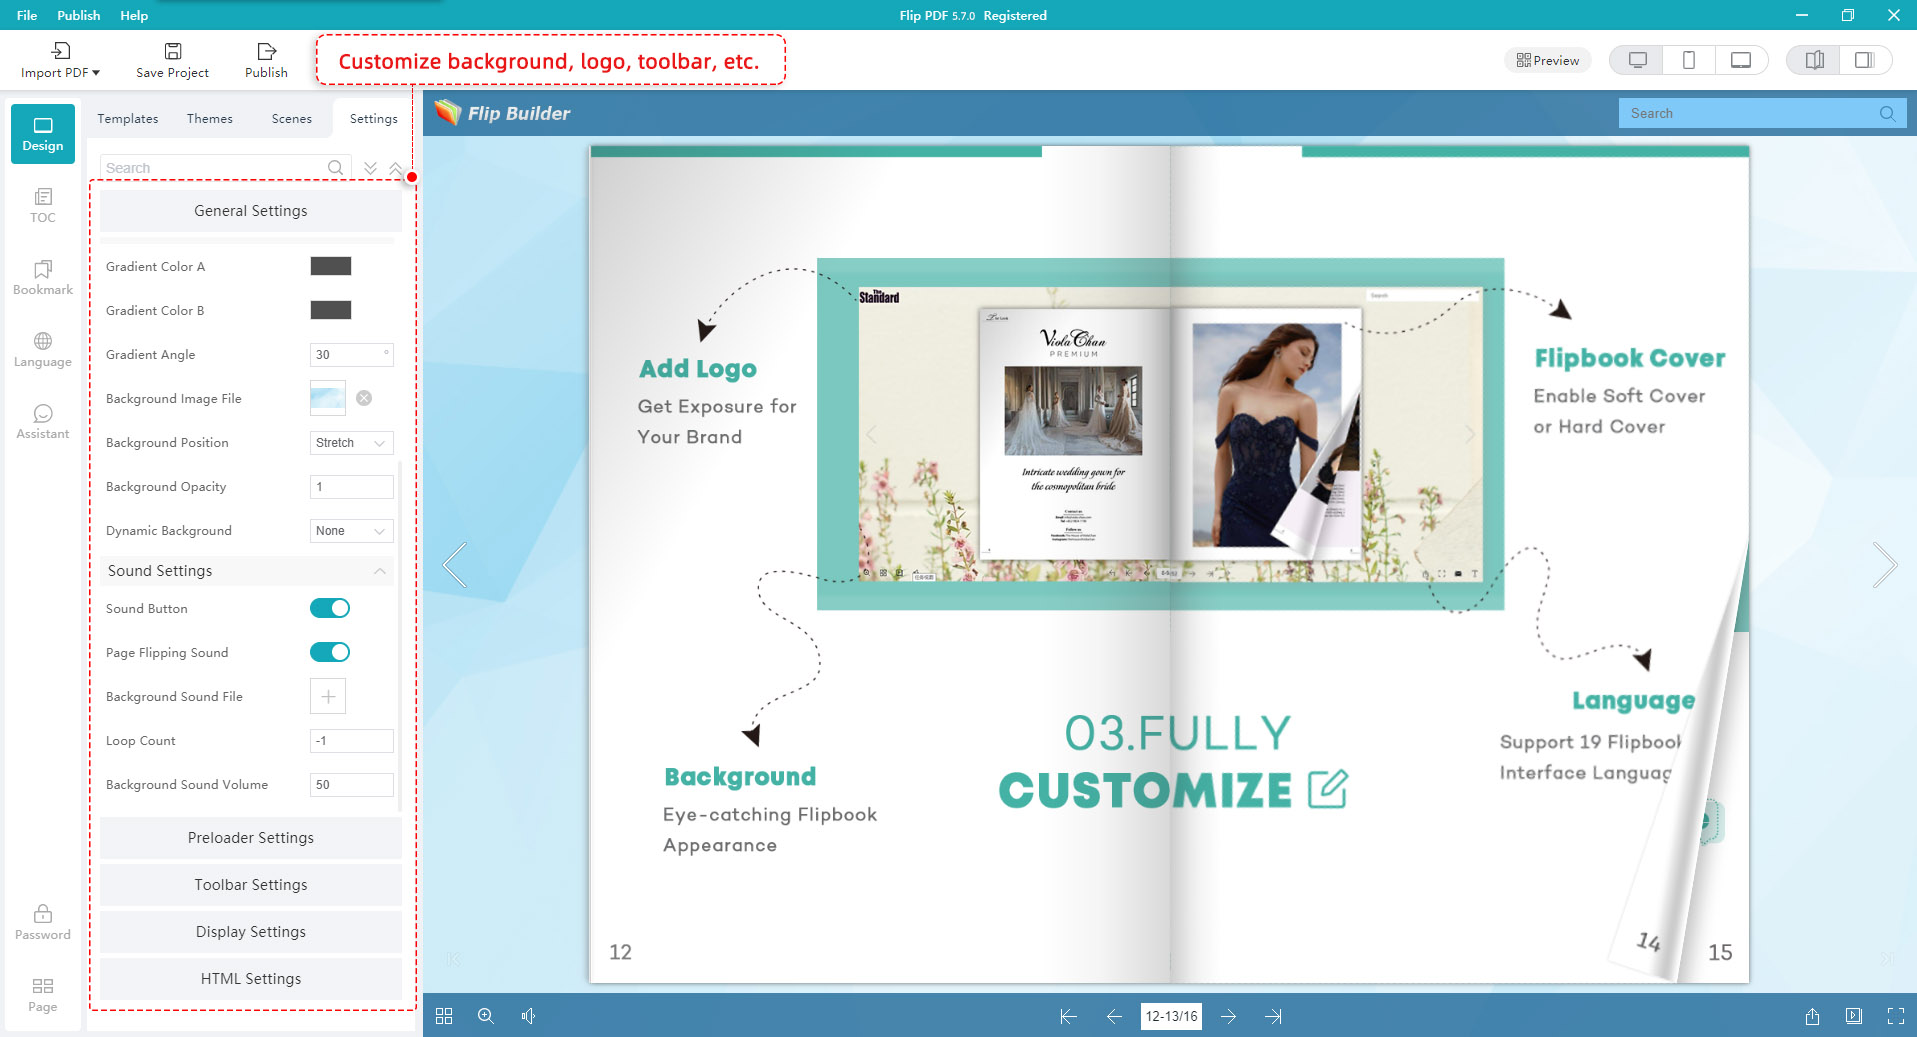 Step 2. Customize your own flipbook